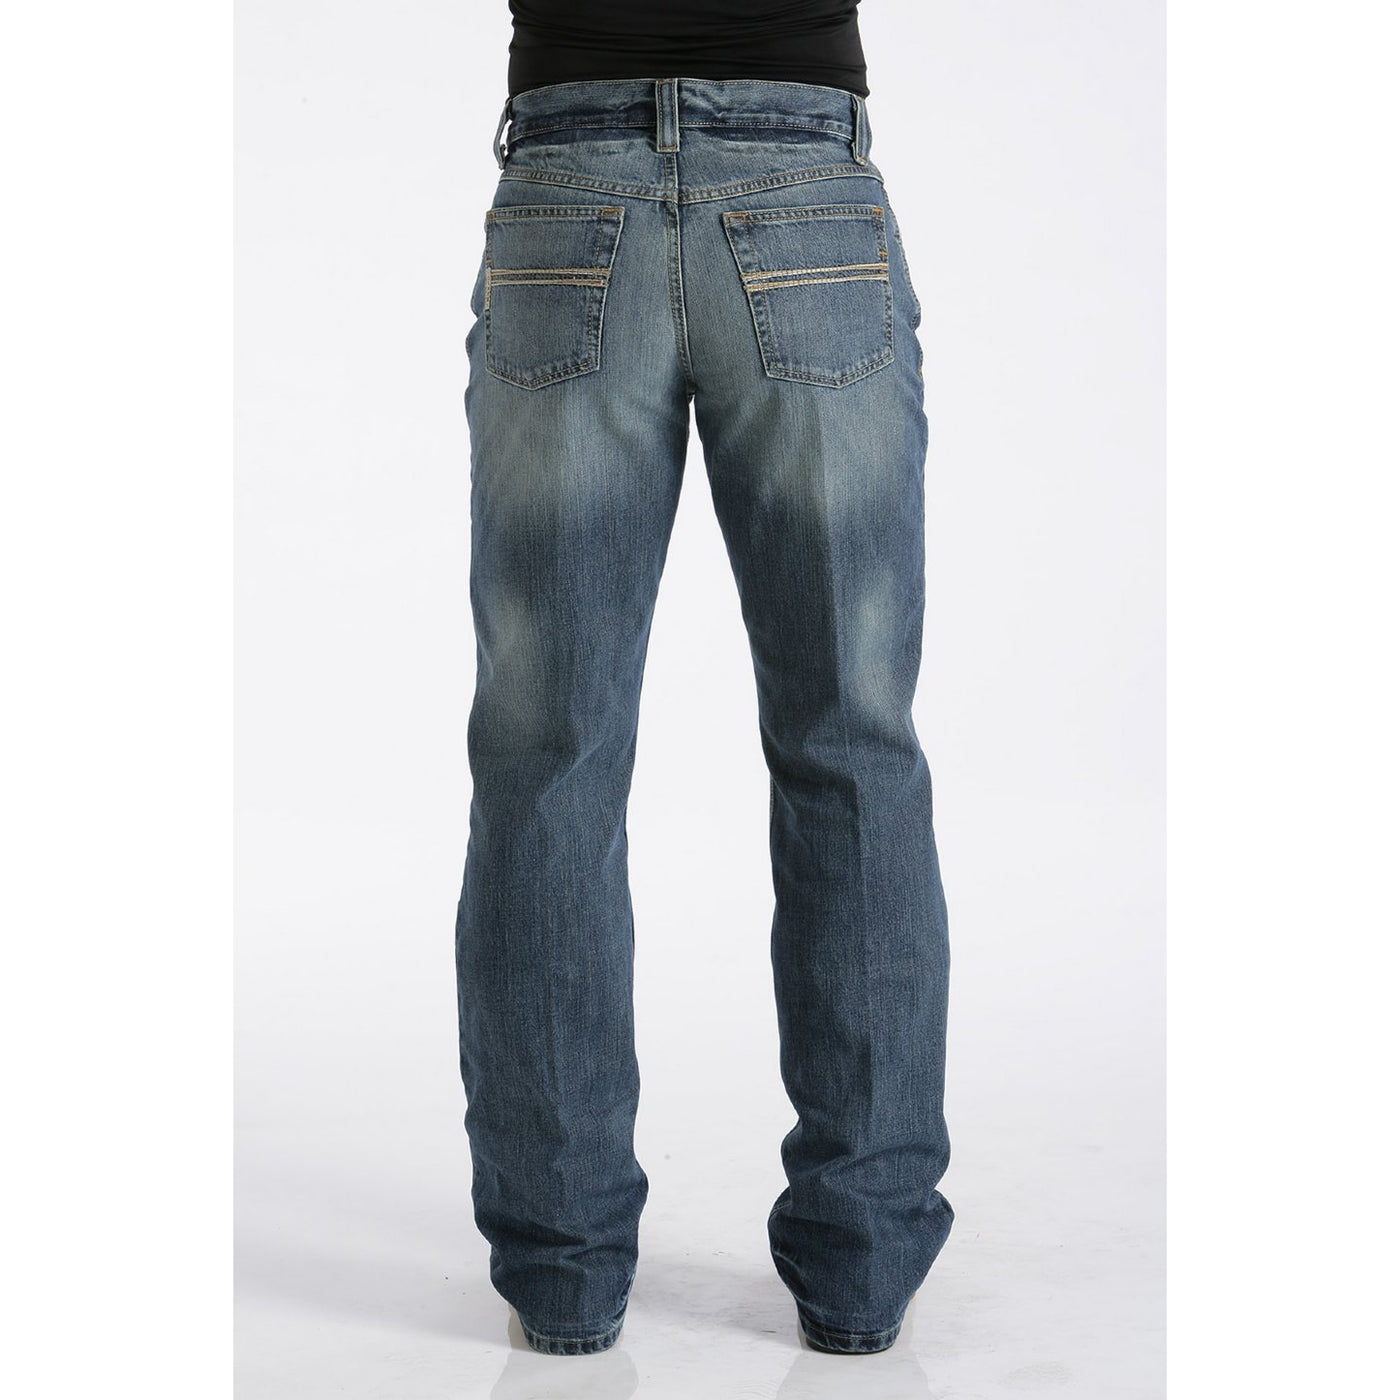 Cinch Men's Relaxed Fit Carter Jean - Medium Stonewash - West 20 Saddle Co.